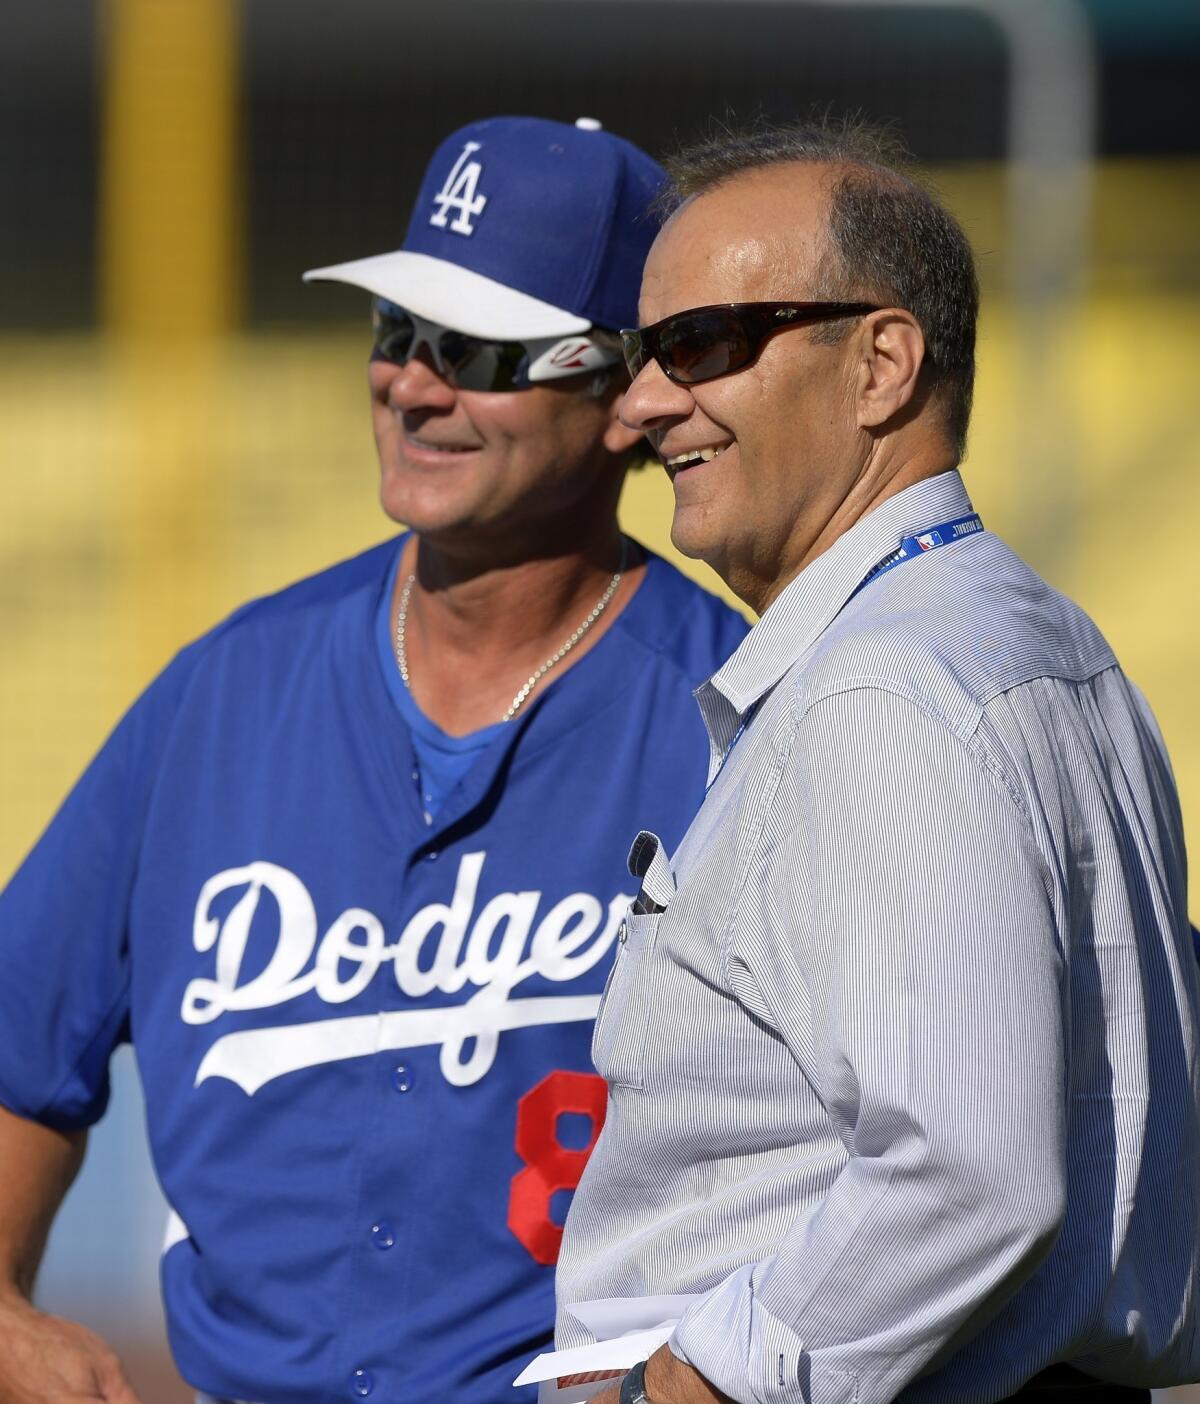 Joe Torre can relate to Don Mattingly's status within Dodgers